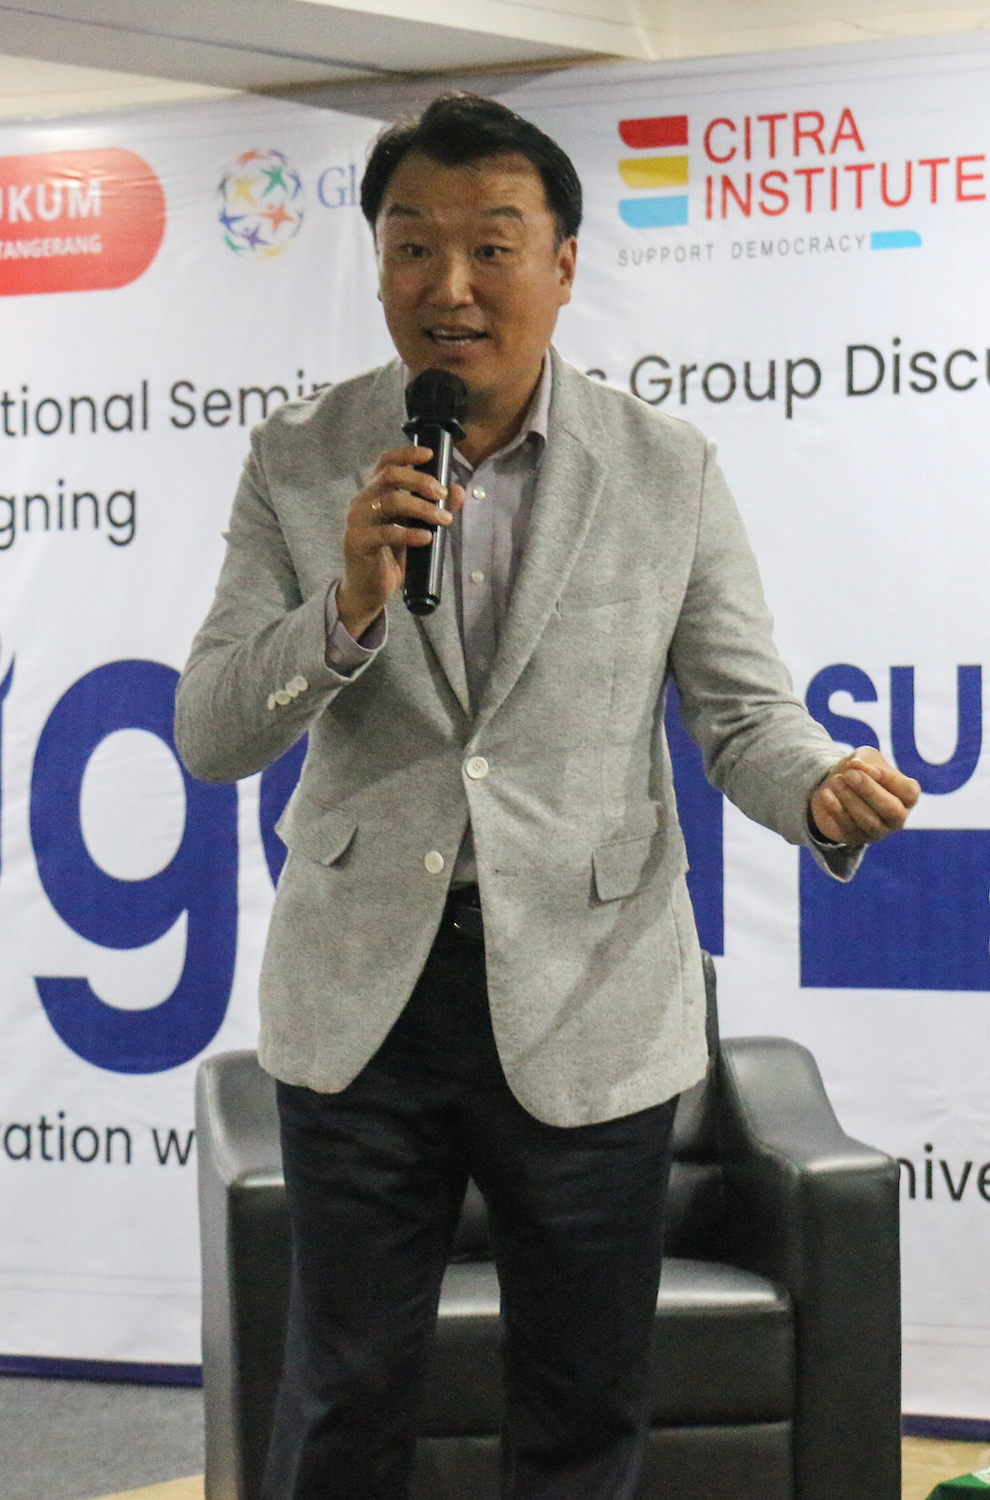 A man in a suit speaking into a microphone at GPF Indonesia's UGen Seminar highlighting Pancasila and Global Peace.